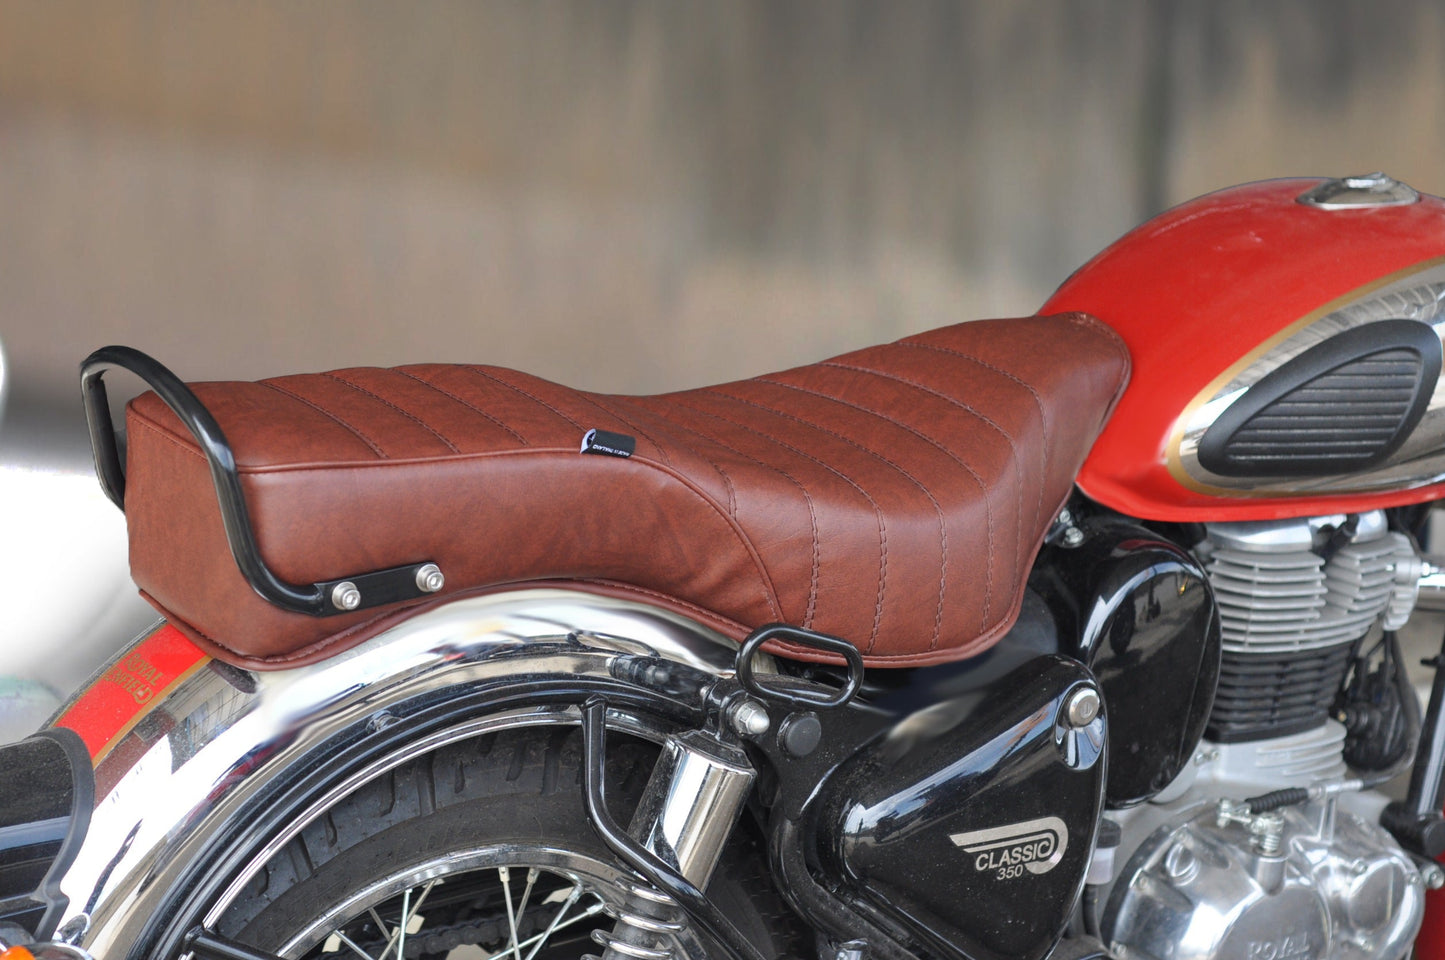 GC-RE001BR ROYAL ENFIELD Brown Classic350 Double Seat